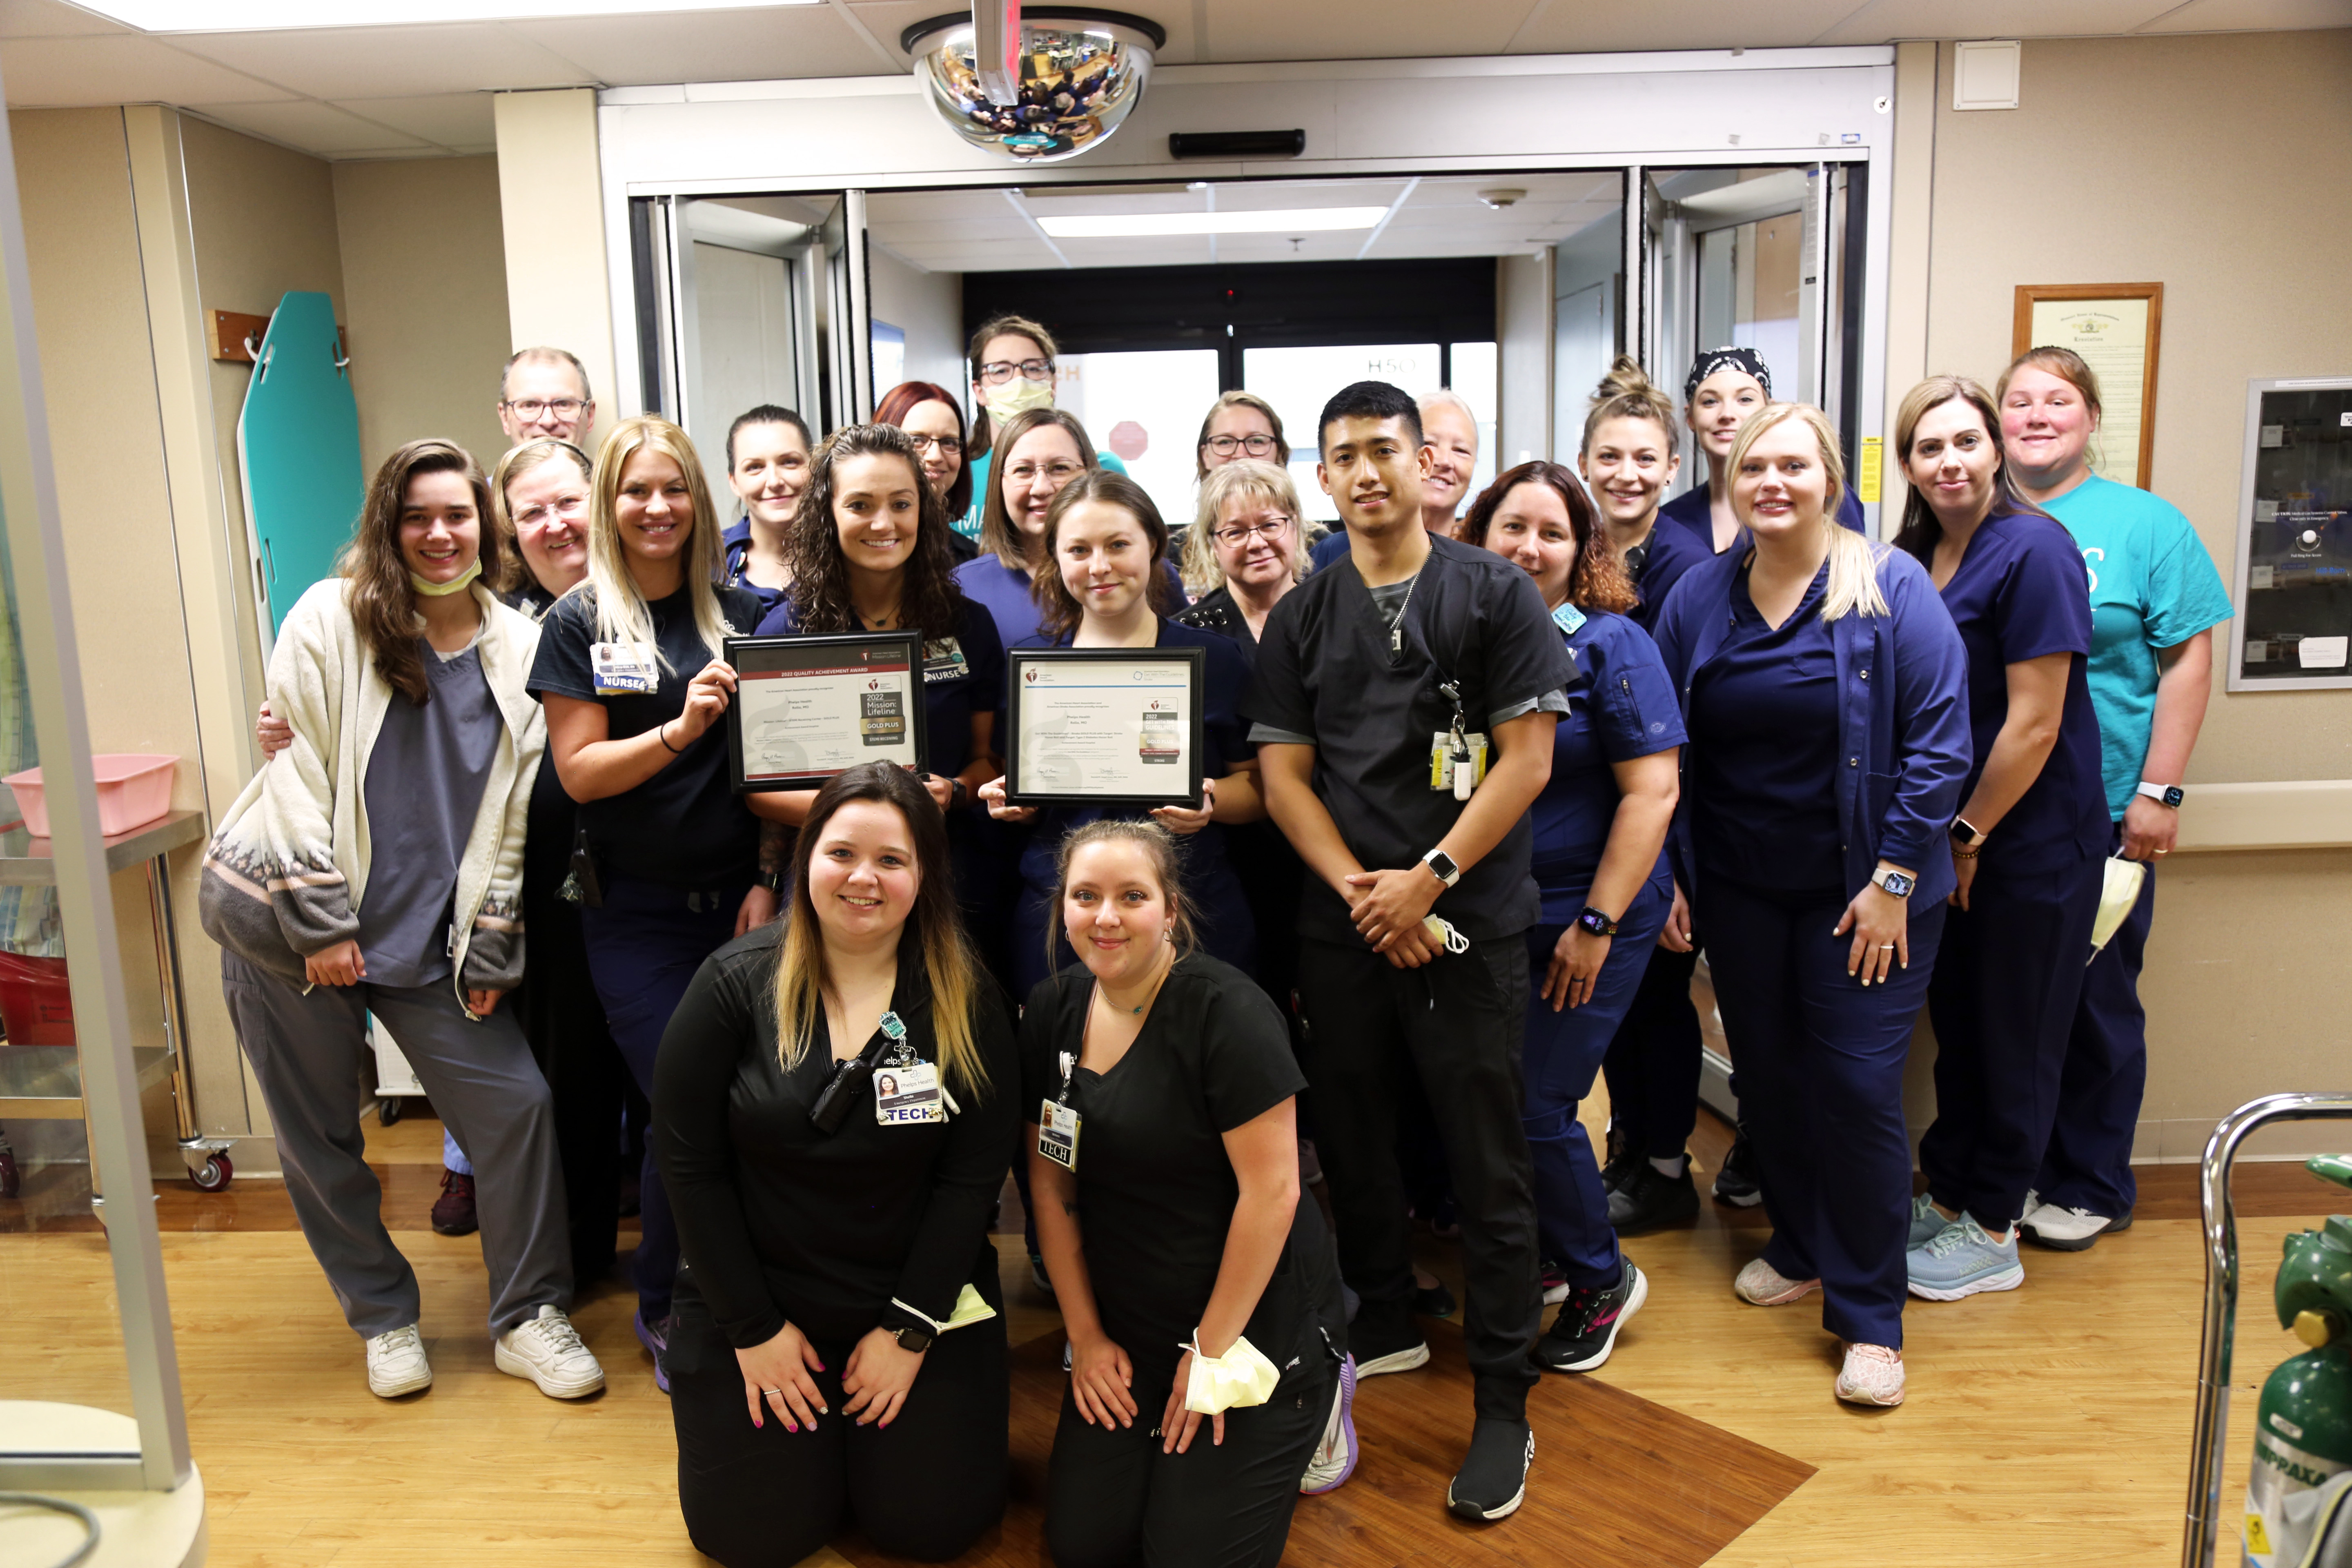 Phelps Health Emergency Department staff with American Heart Association award